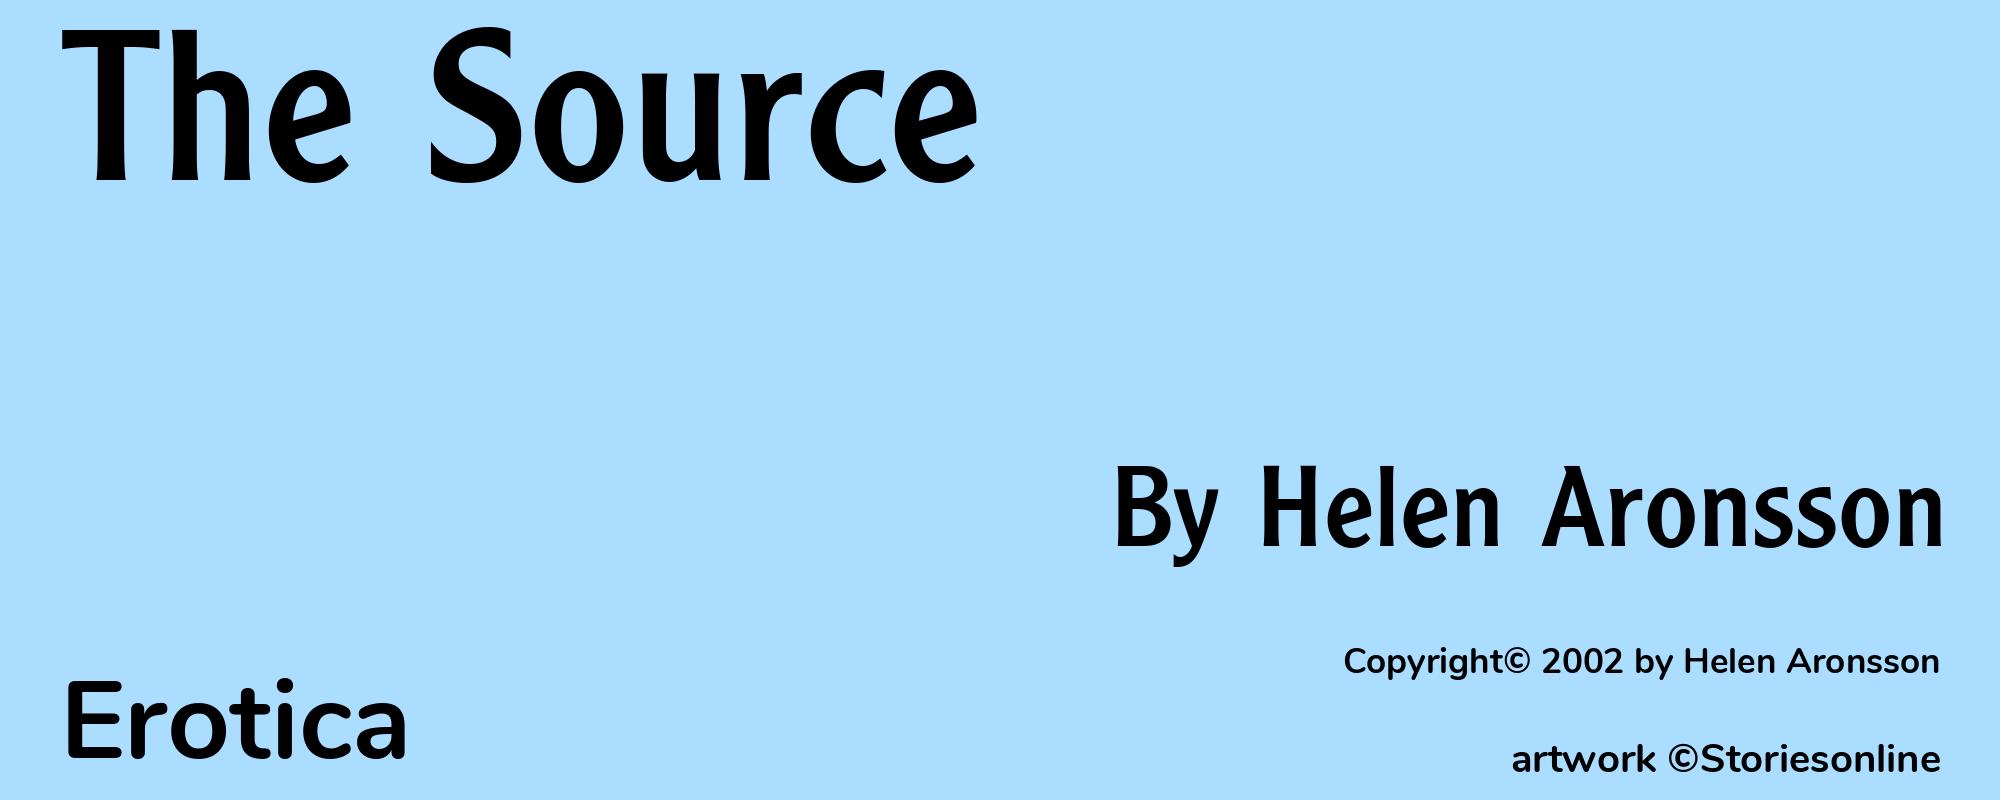 The Source - Cover